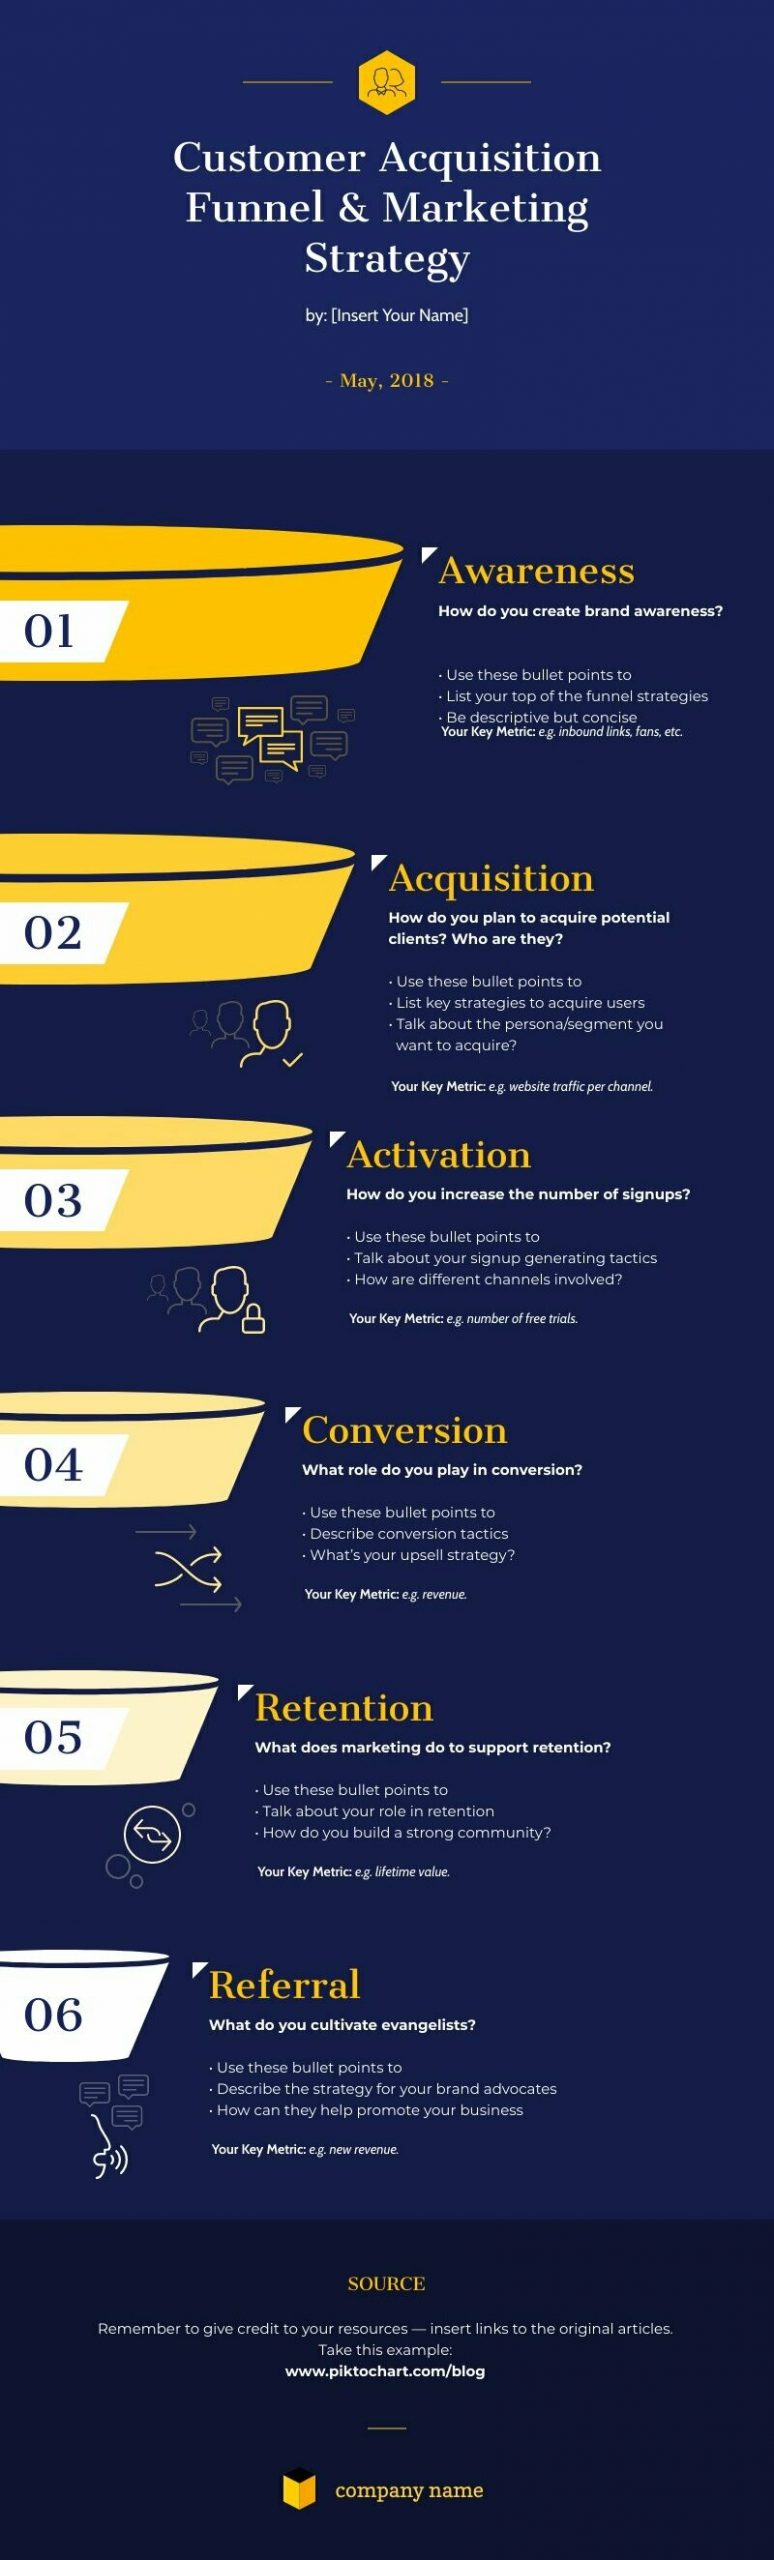 Customer Acquisition Funnel Process Infographic Template